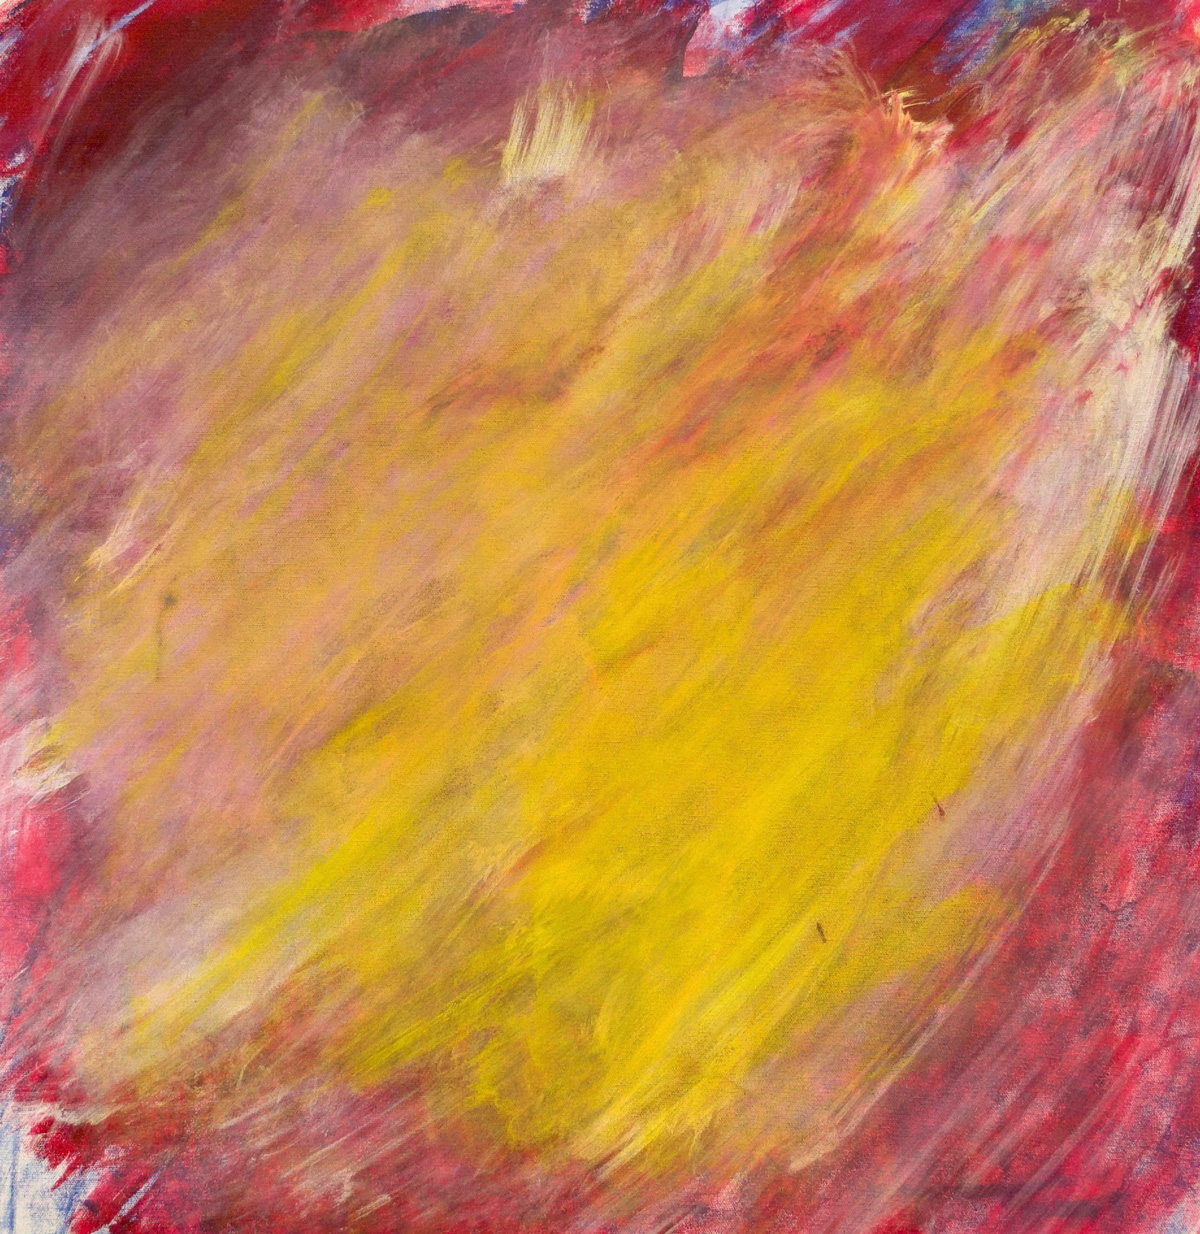 Painting: A blend of magenta, white, and yellow all going the same direction, from the bottom left to the top right of the canvas.